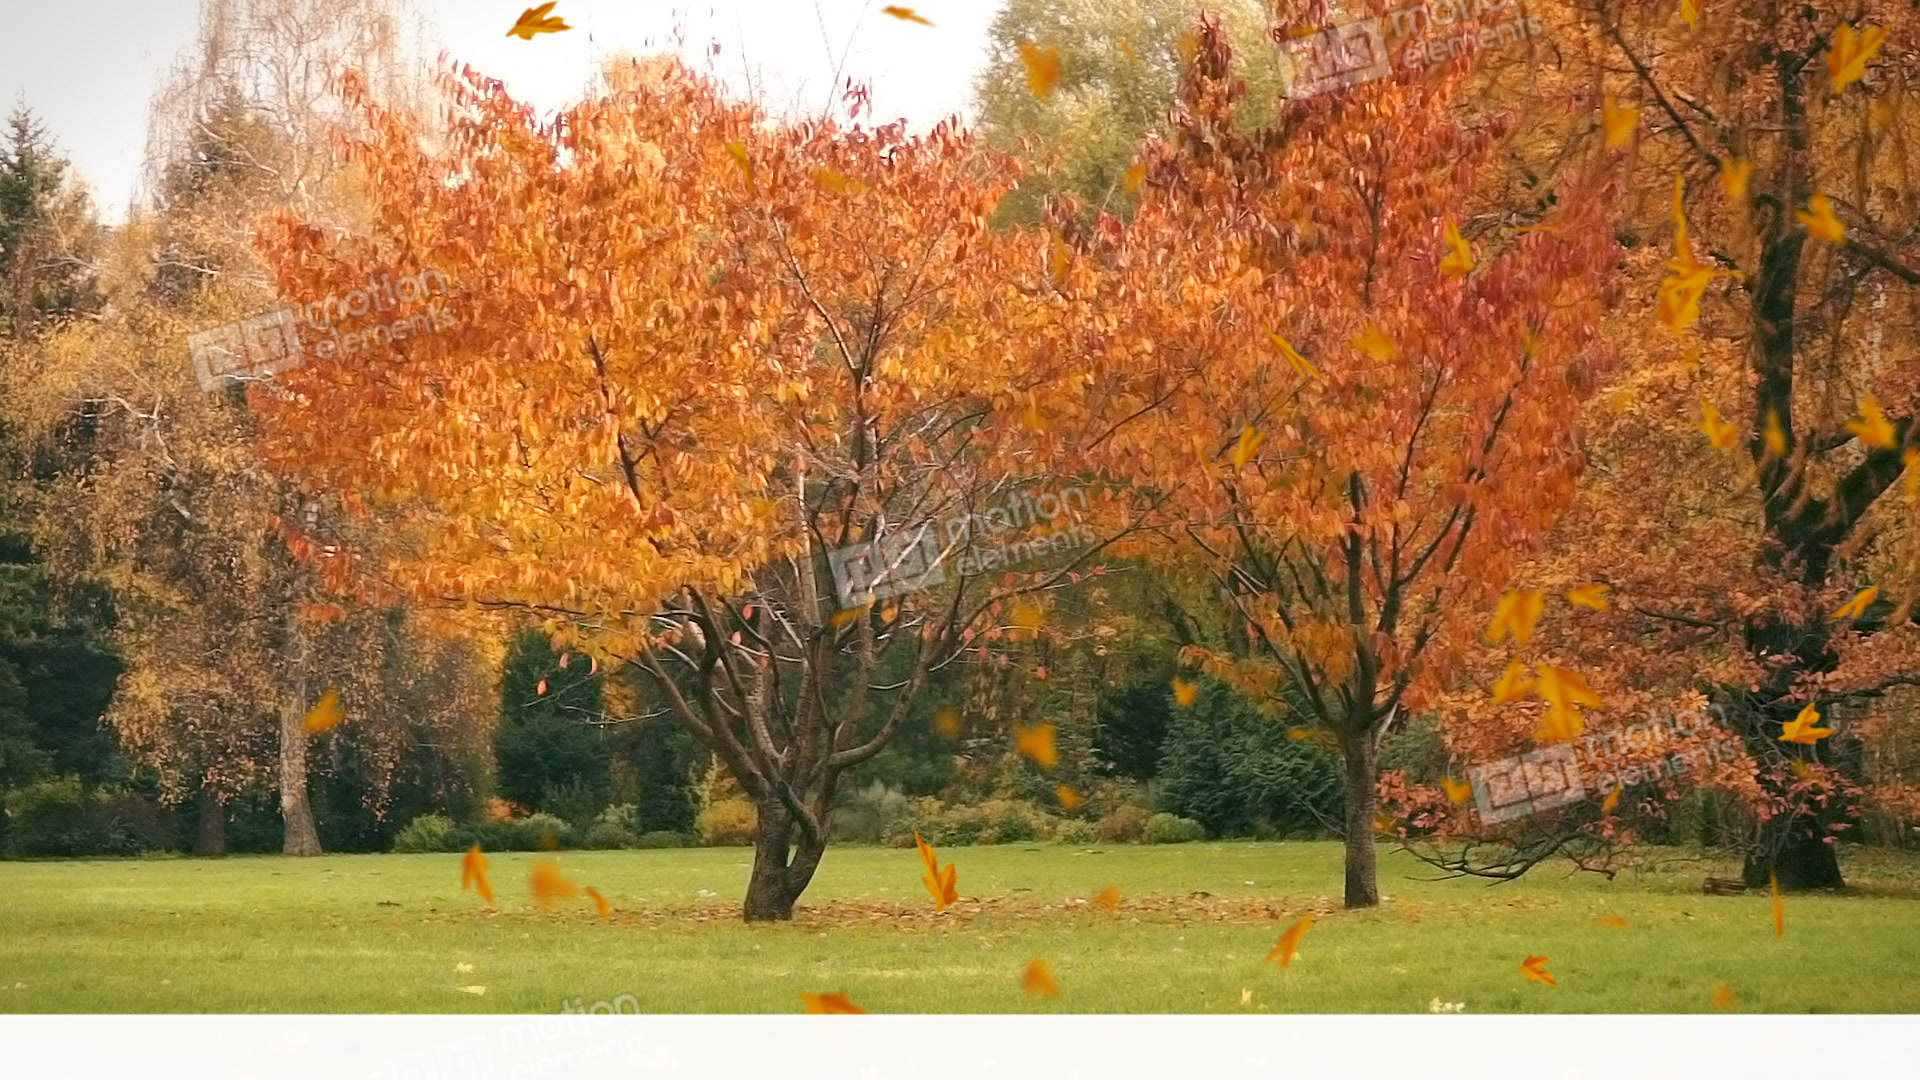 Autumn Leaves Fall On The Grass, Background Stock video footage ...